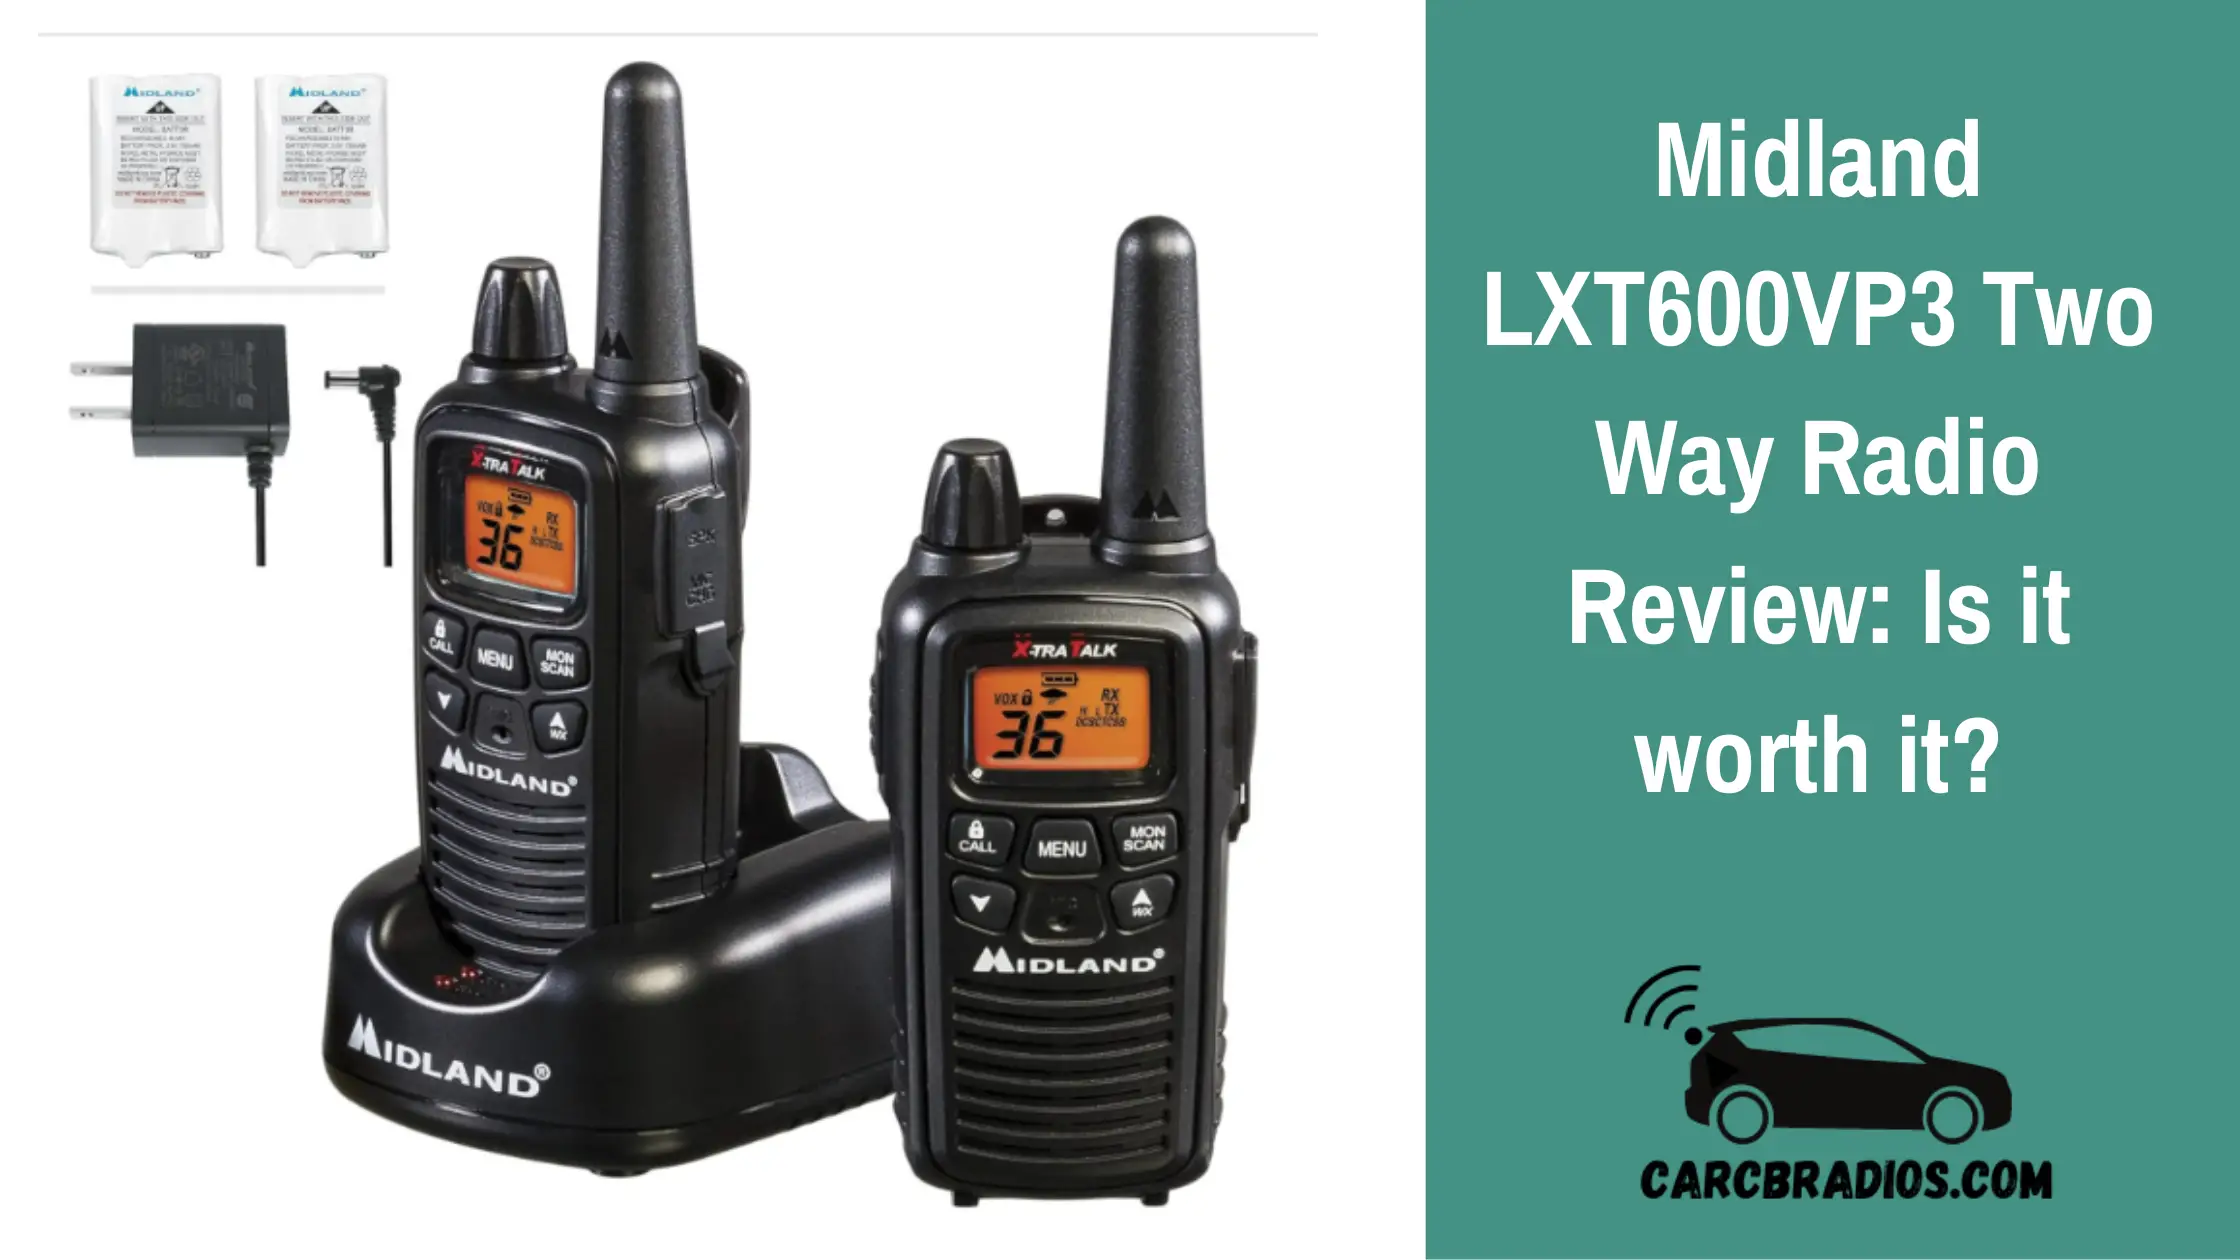 These radios come with 36 FRS channels and a channel scan feature, making it easy to check for activity on different channels. Plus, they offer dual power options, including rechargeable battery packs and AAA batteries, for added flexibility.